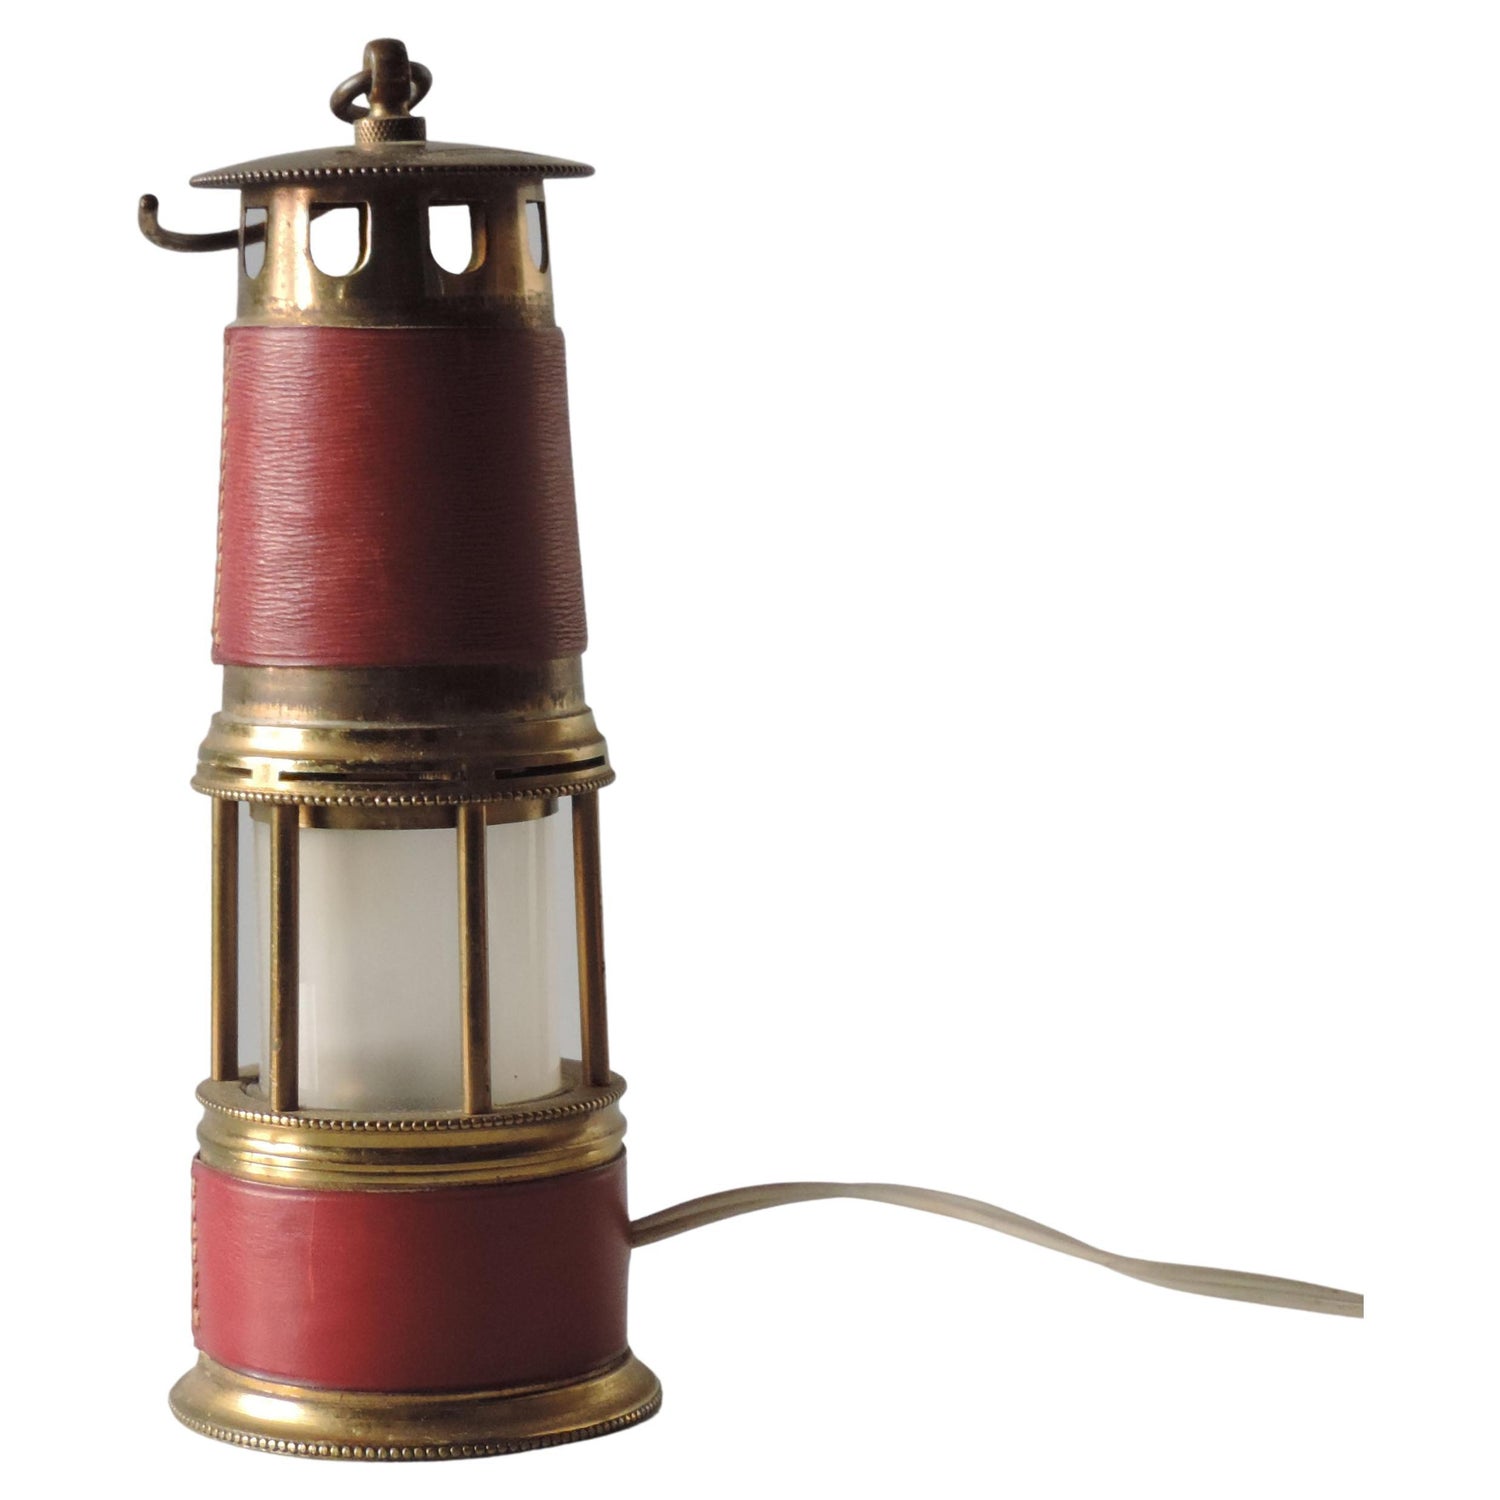 Miners Lamp - 21 For Sale on 1stDibs | how much is a miners lamp worth, miners  lamp for sale, davy lamp for sale